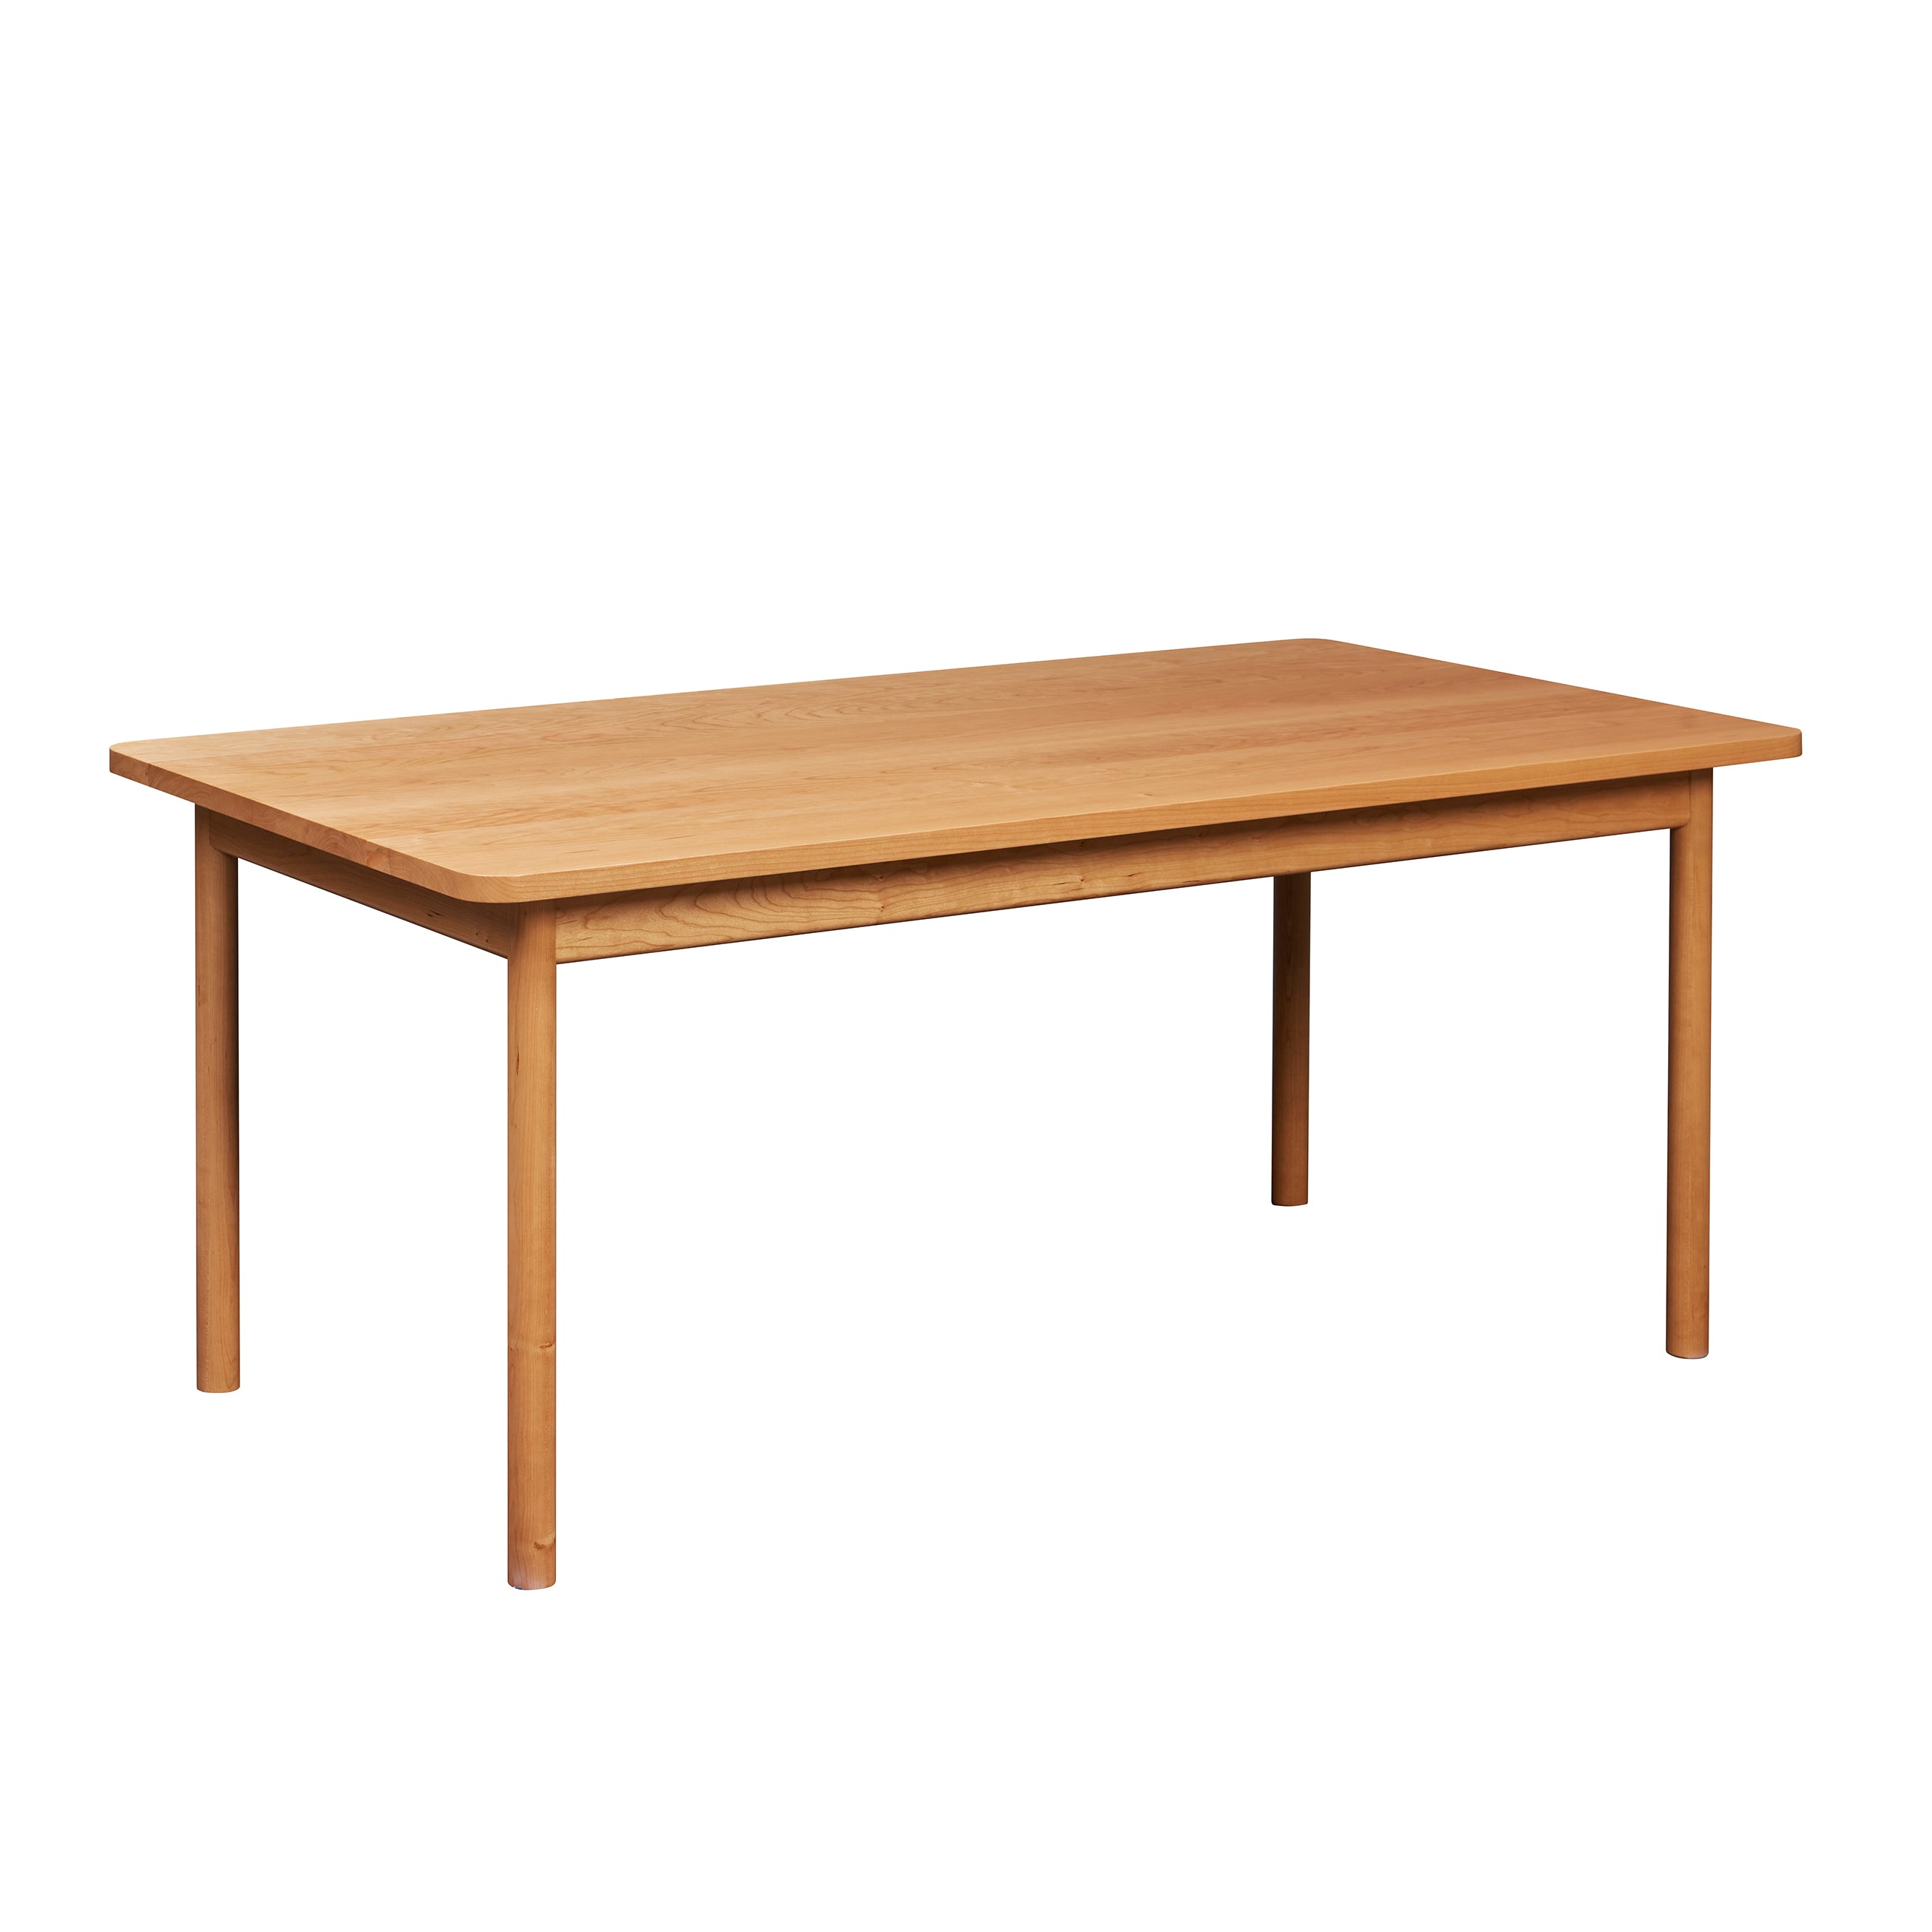 Modern Atlas Dining Table in cherry from Chilton Furniture in Maine. 